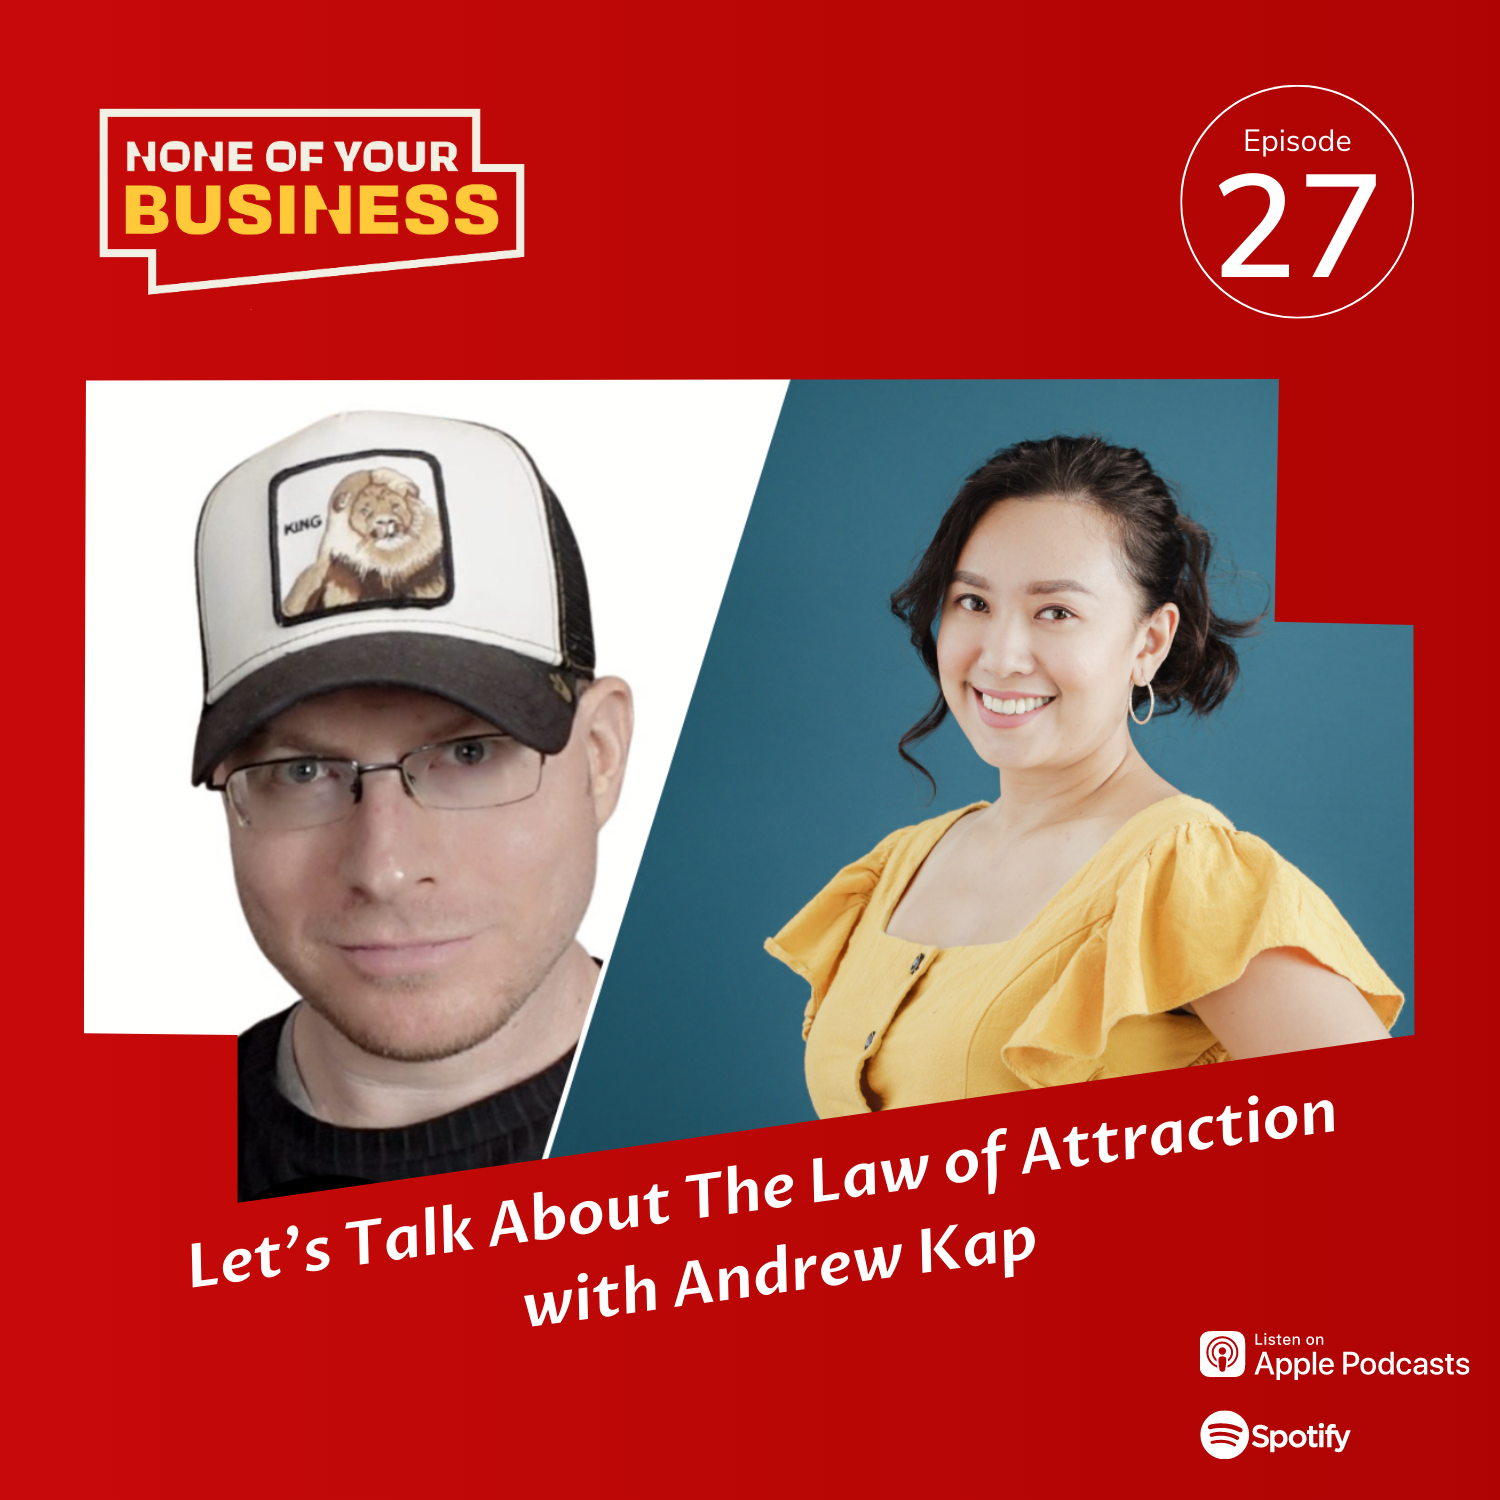 Let's Talk About The Law of Attraction with Bestselling Author of "The Last Law of Attraction Book You'll Ever Need to Read" Andrew Kap